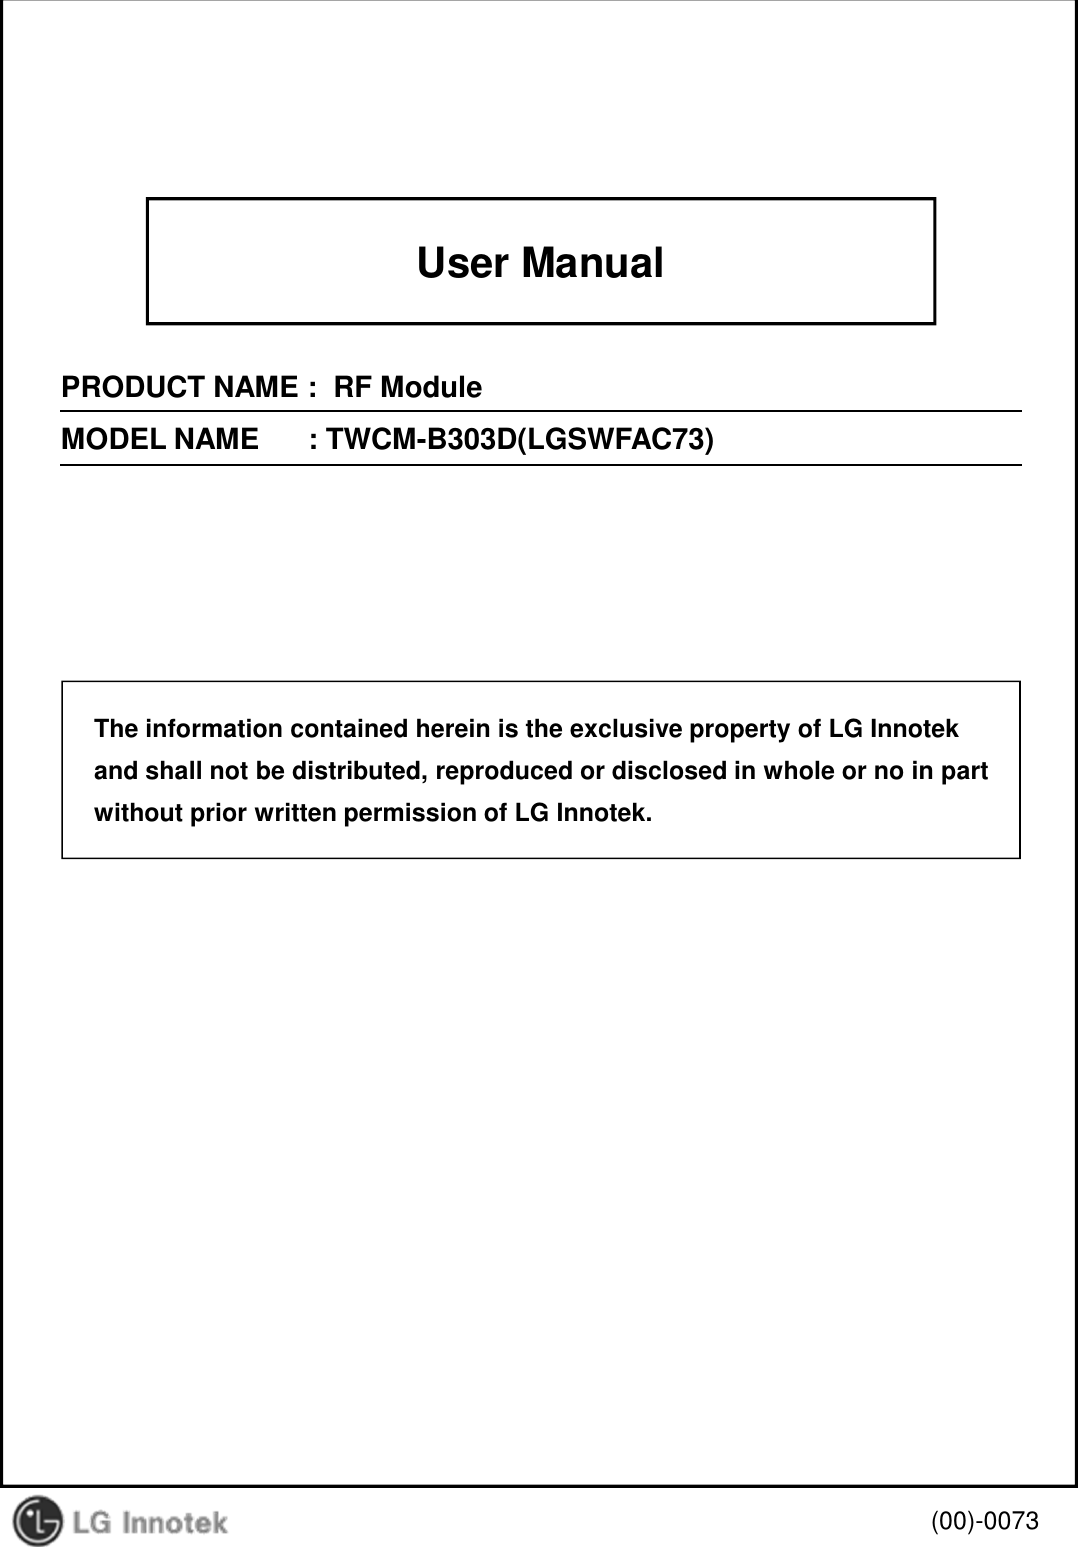 User ManualPRODUCT NAME :  RF ModuleMODEL NAME   : TWCM-B303D(LGSWFAC73)(00)-0073The information contained herein is the exclusive property of LG Innotekand shall not be distributed, reproduced or disclosed in whole or no in partwithout prior written permission of LG Innotek.